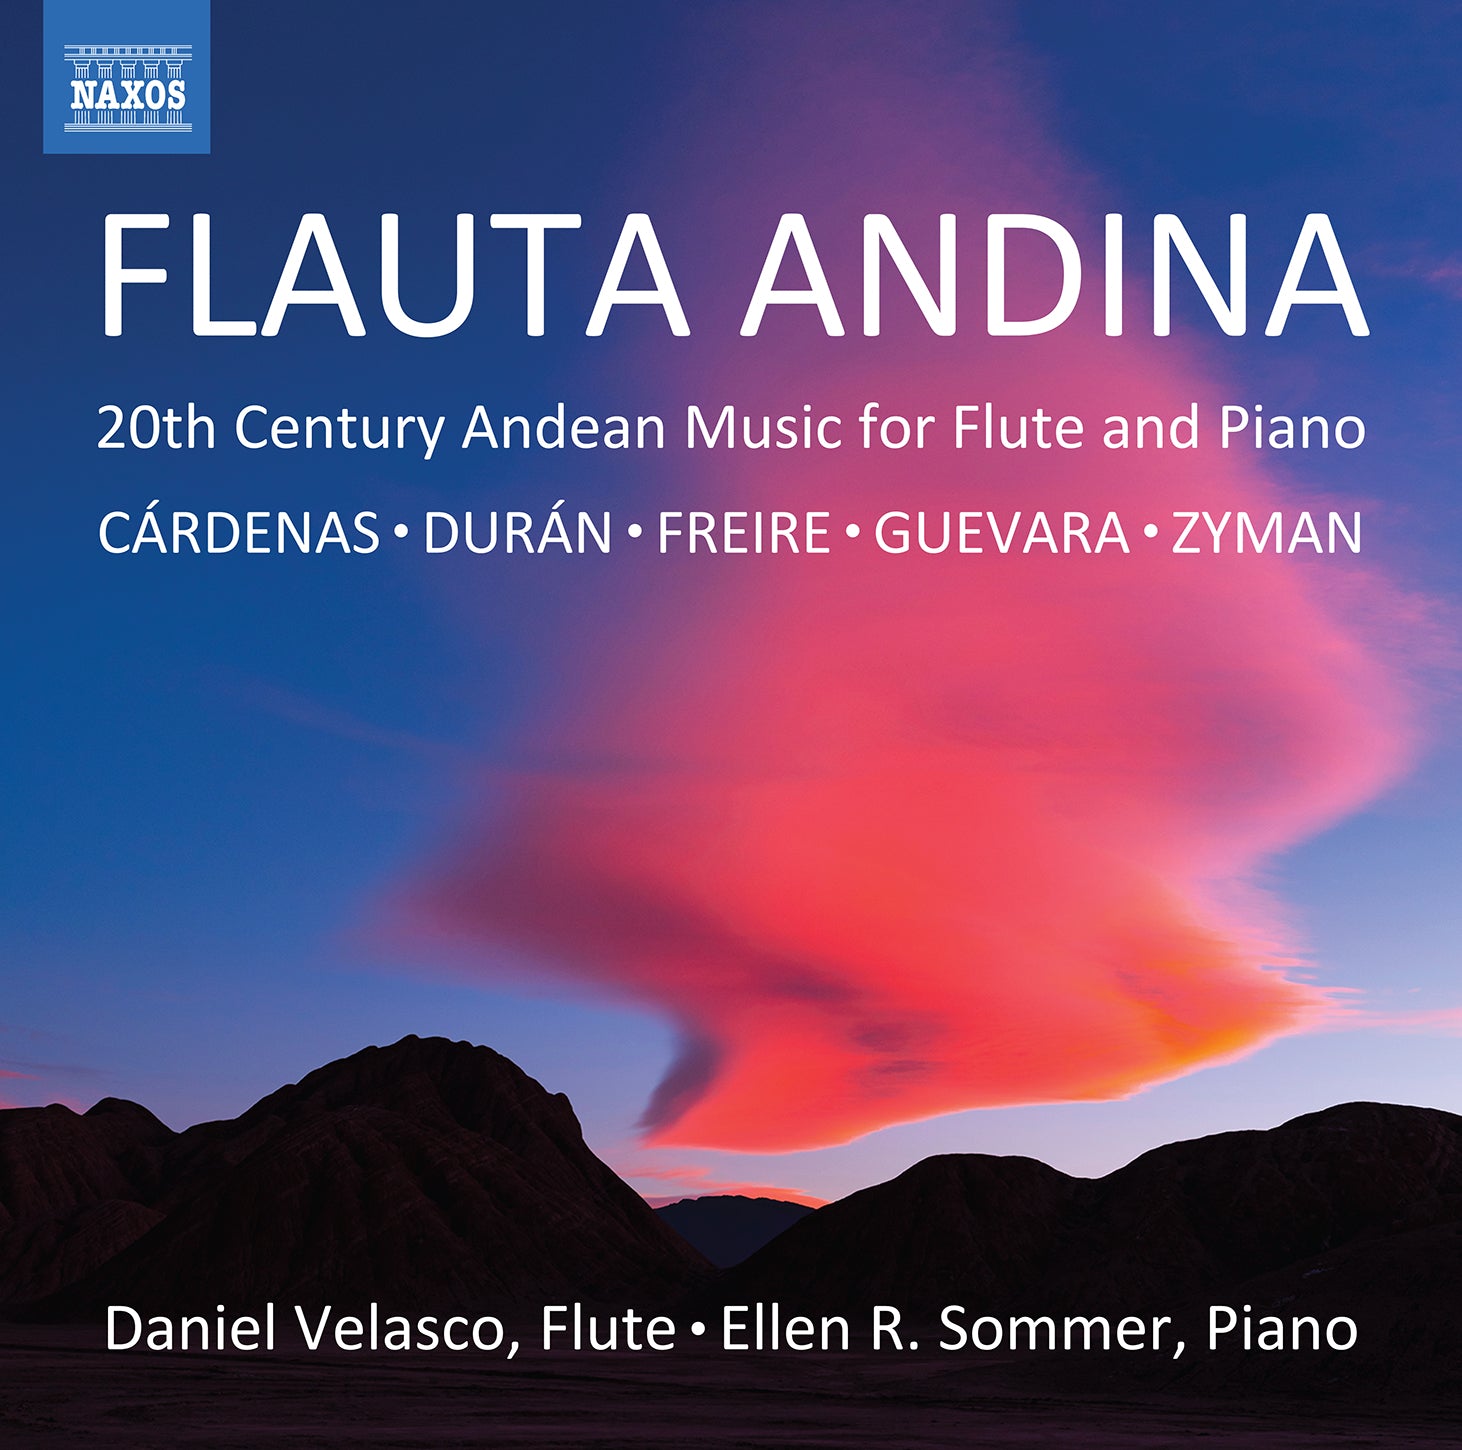 Flauta andina: 20th Century Andean Music for Flute & Piano / Velasco, Sommer